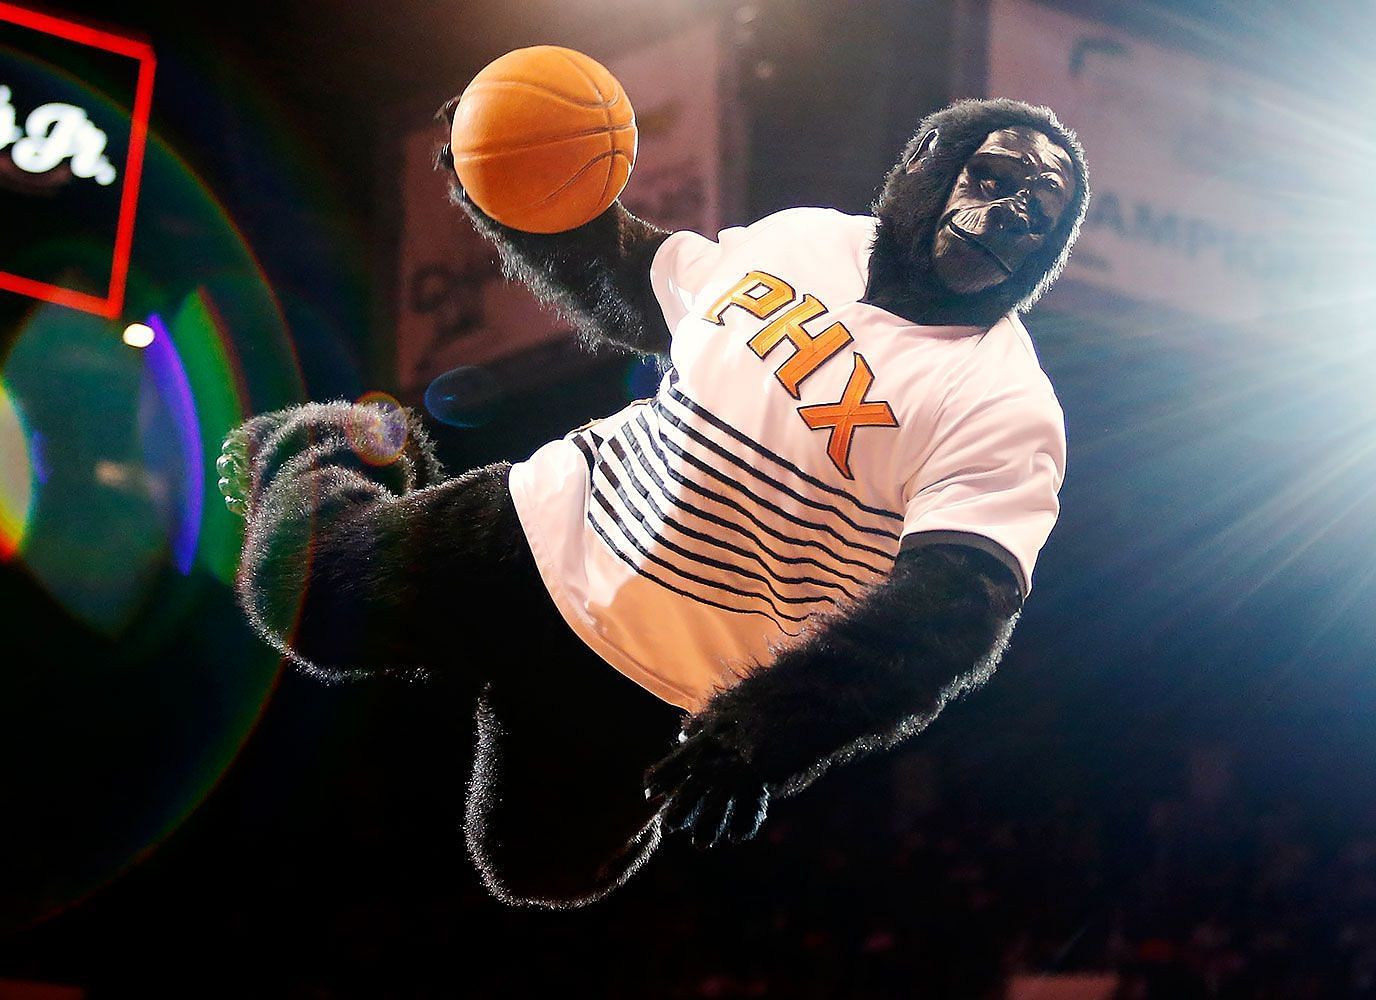 Top 5 NBA mascots ranked by salaries, featuring the Denver Nuggets